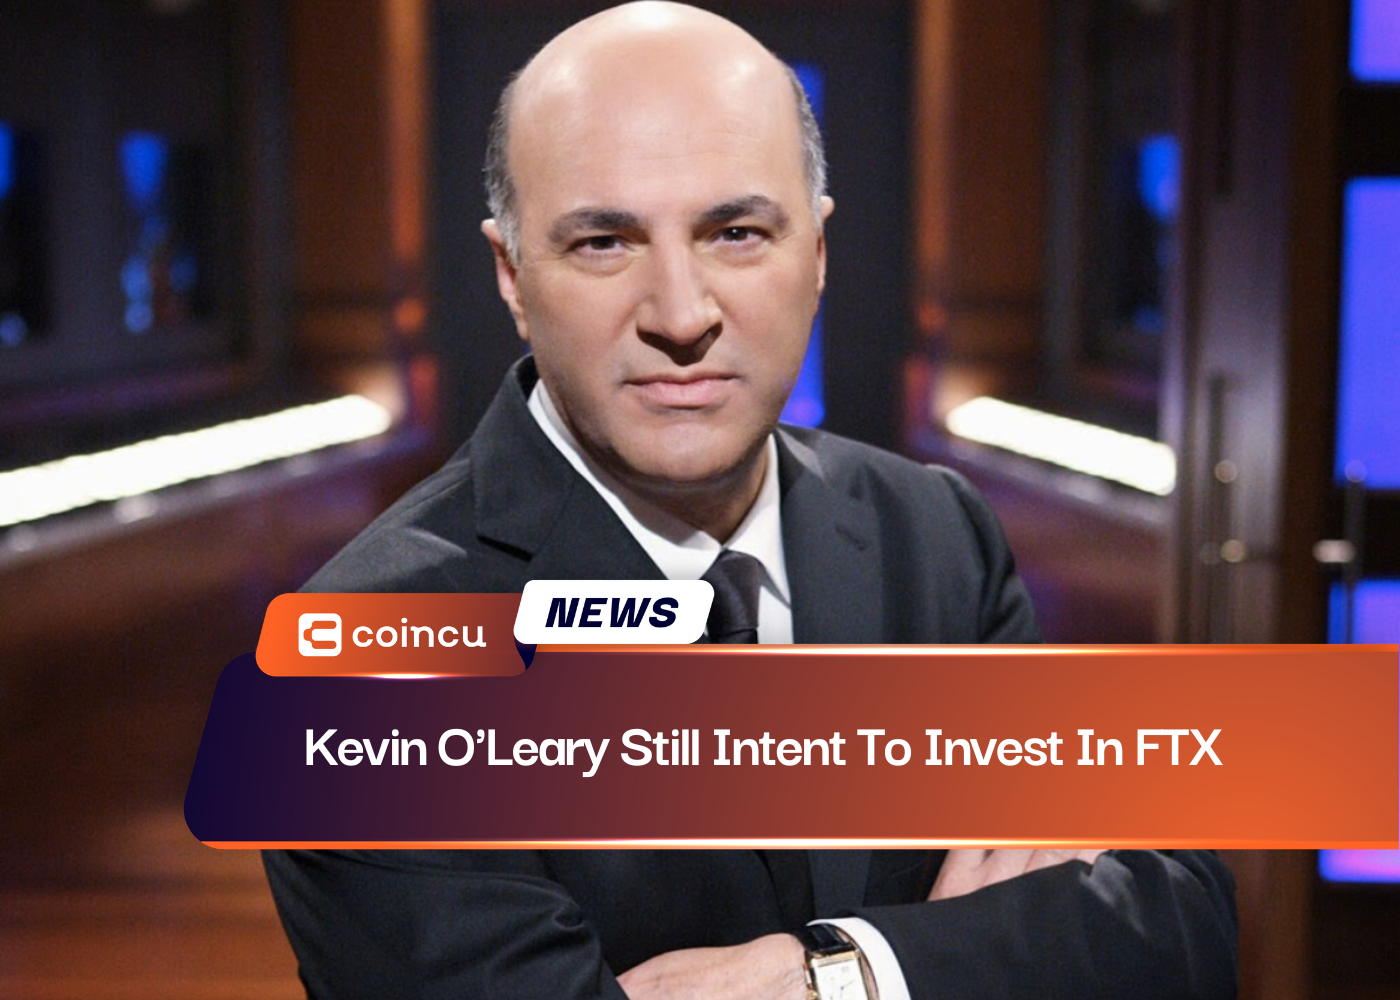 Kevin O'Leary Still Intent To Invest In FTX